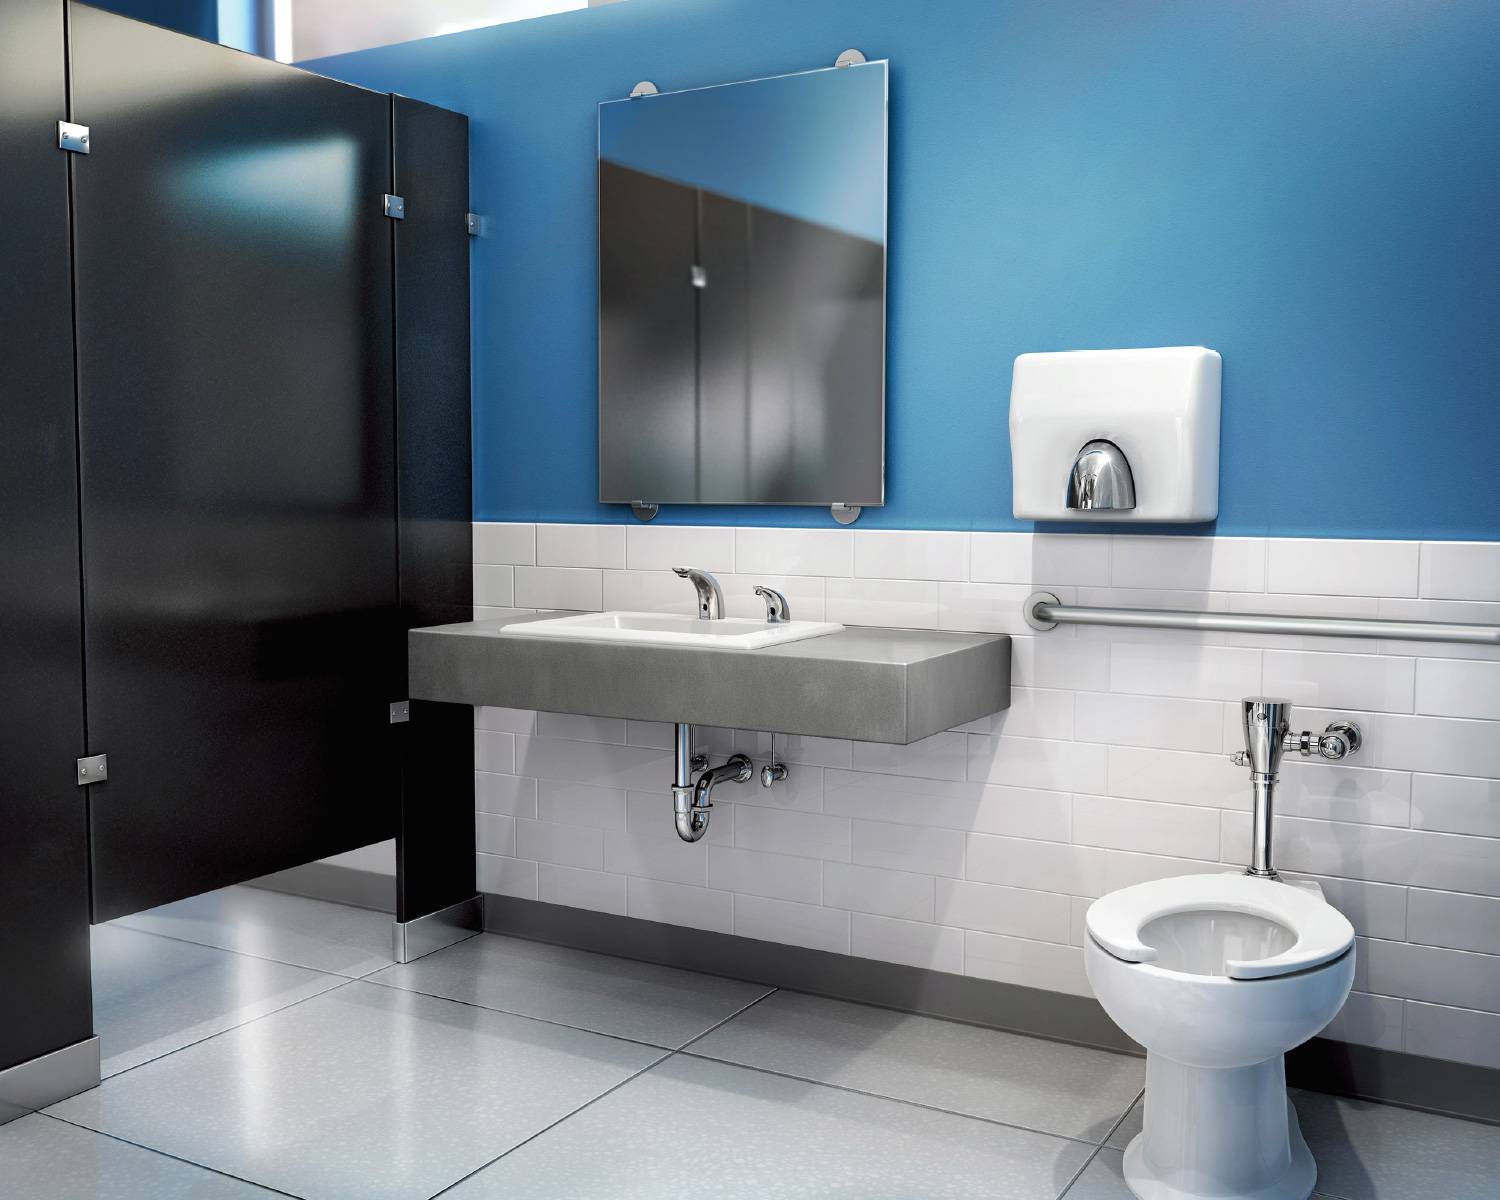 technology-flows-into-commercial-restrooms-ada-compliance-shifts-to